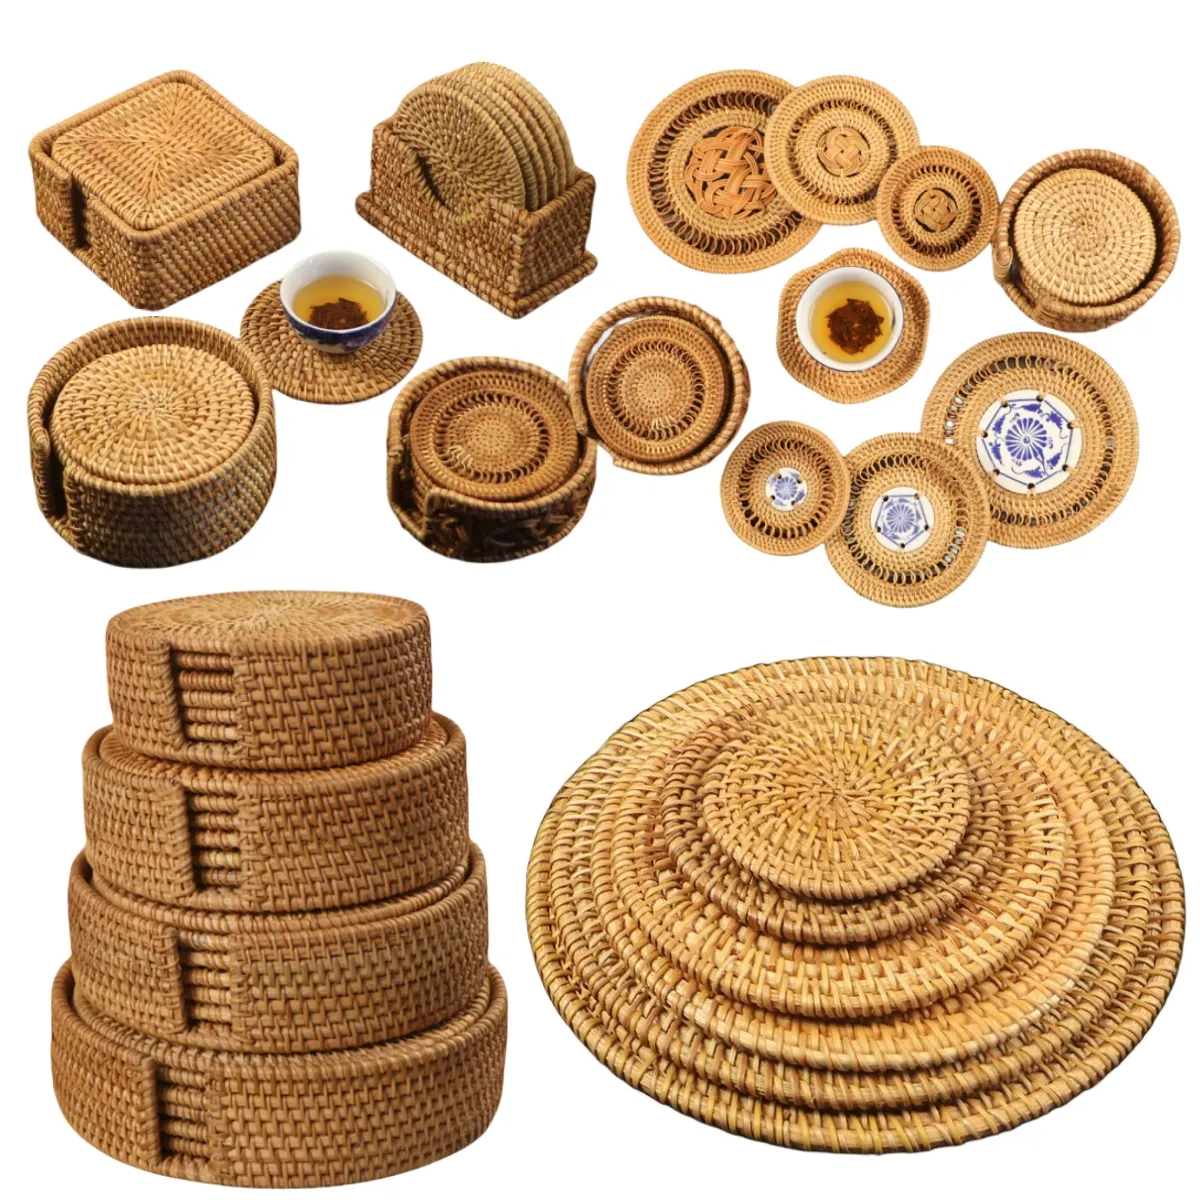 Hot Bulk Packaged Natural round Woven Placemats Handmade Rattan Coaster Set Dining Insulated Drinking Heat Resistant Pad